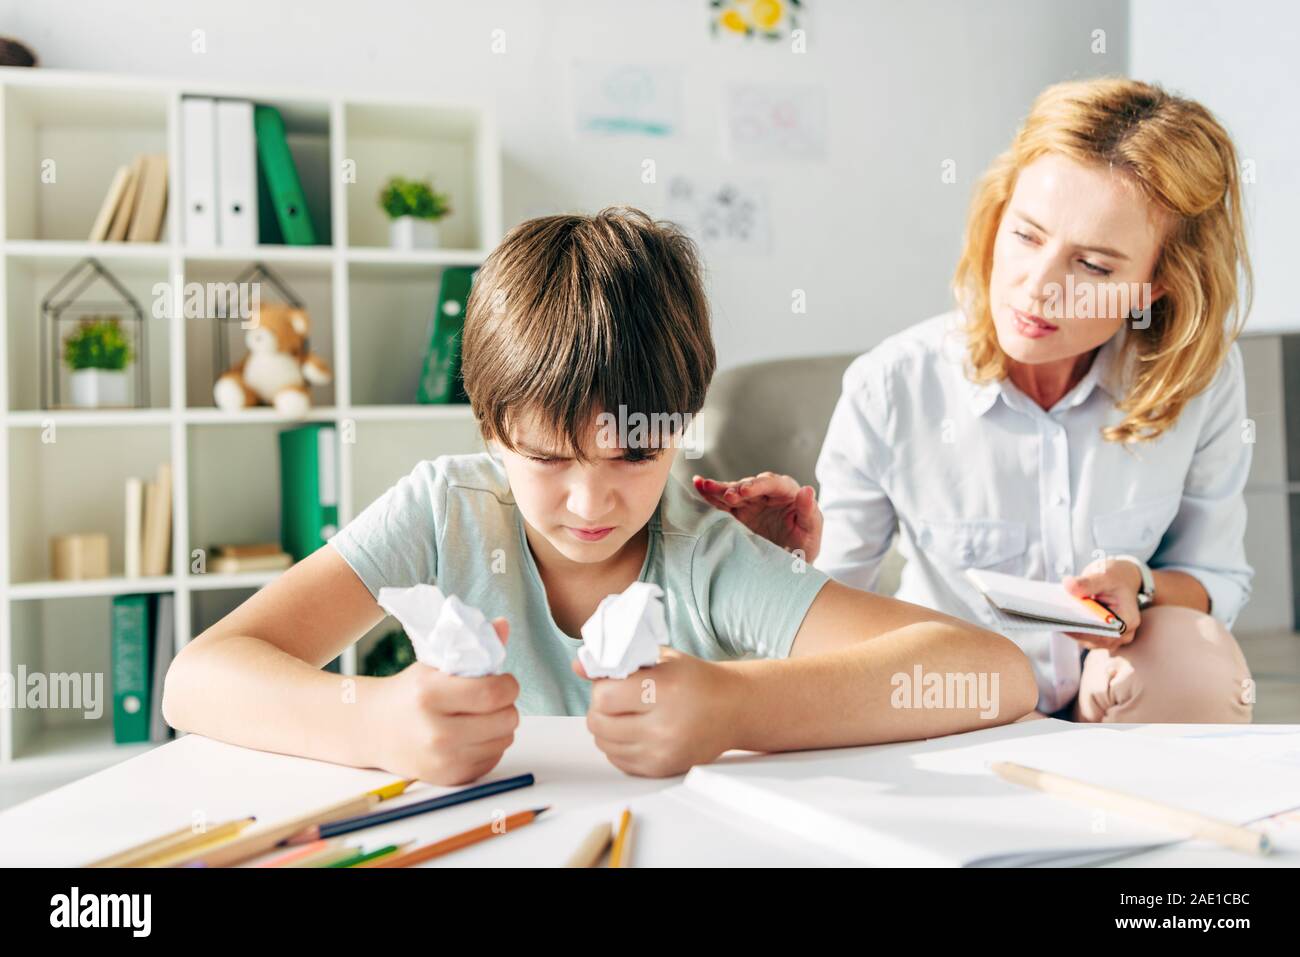 irritated kid with dyslexia holding crumpled papers and child psychologist talking to him Stock Photo